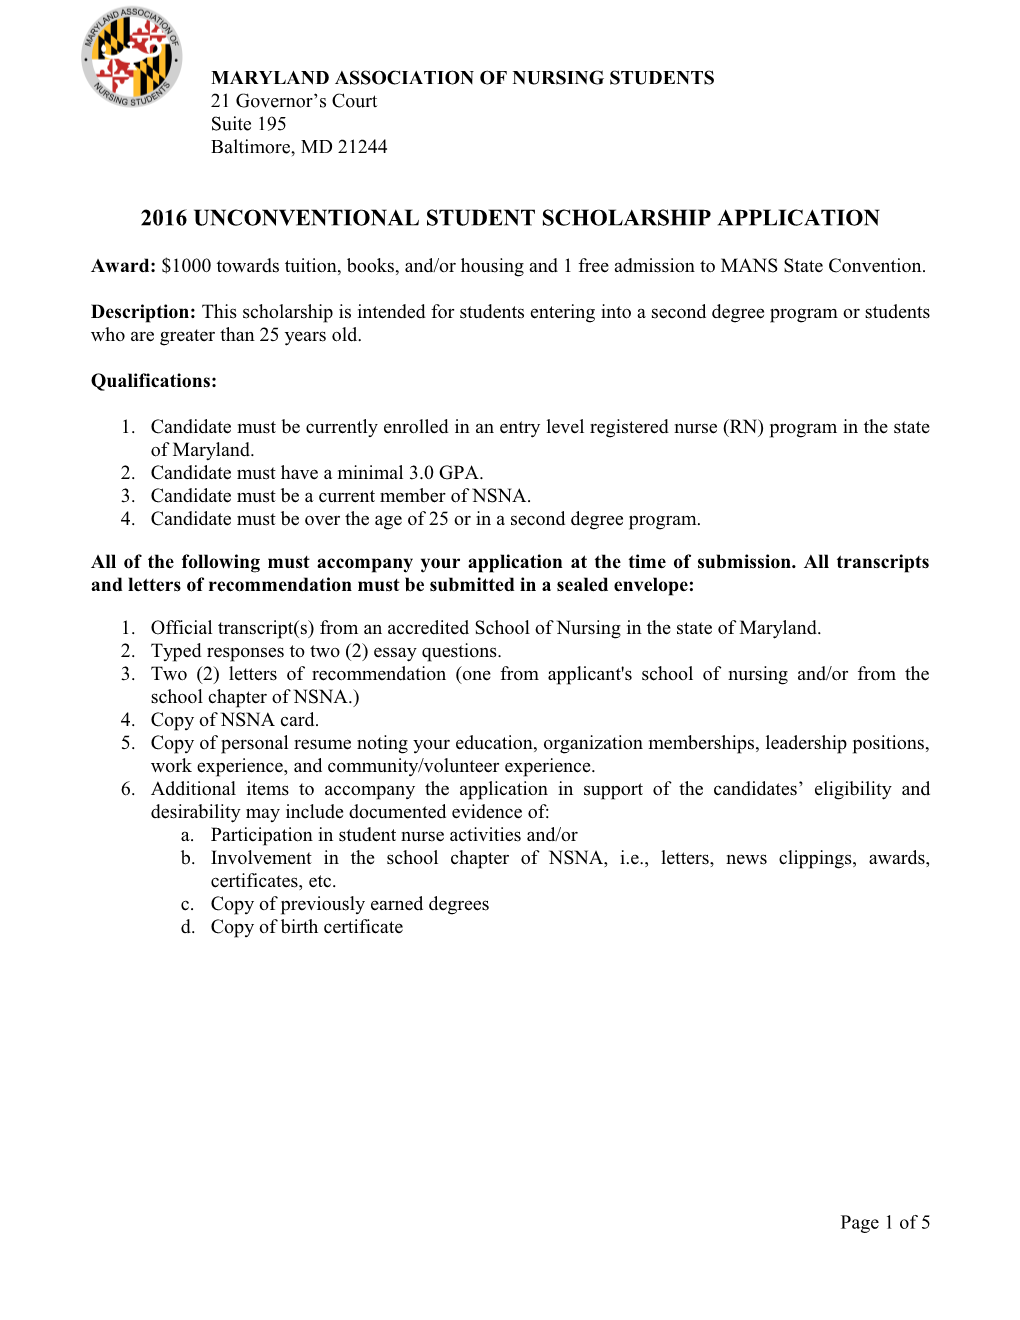 2016 Unconventional Student Scholarship Application